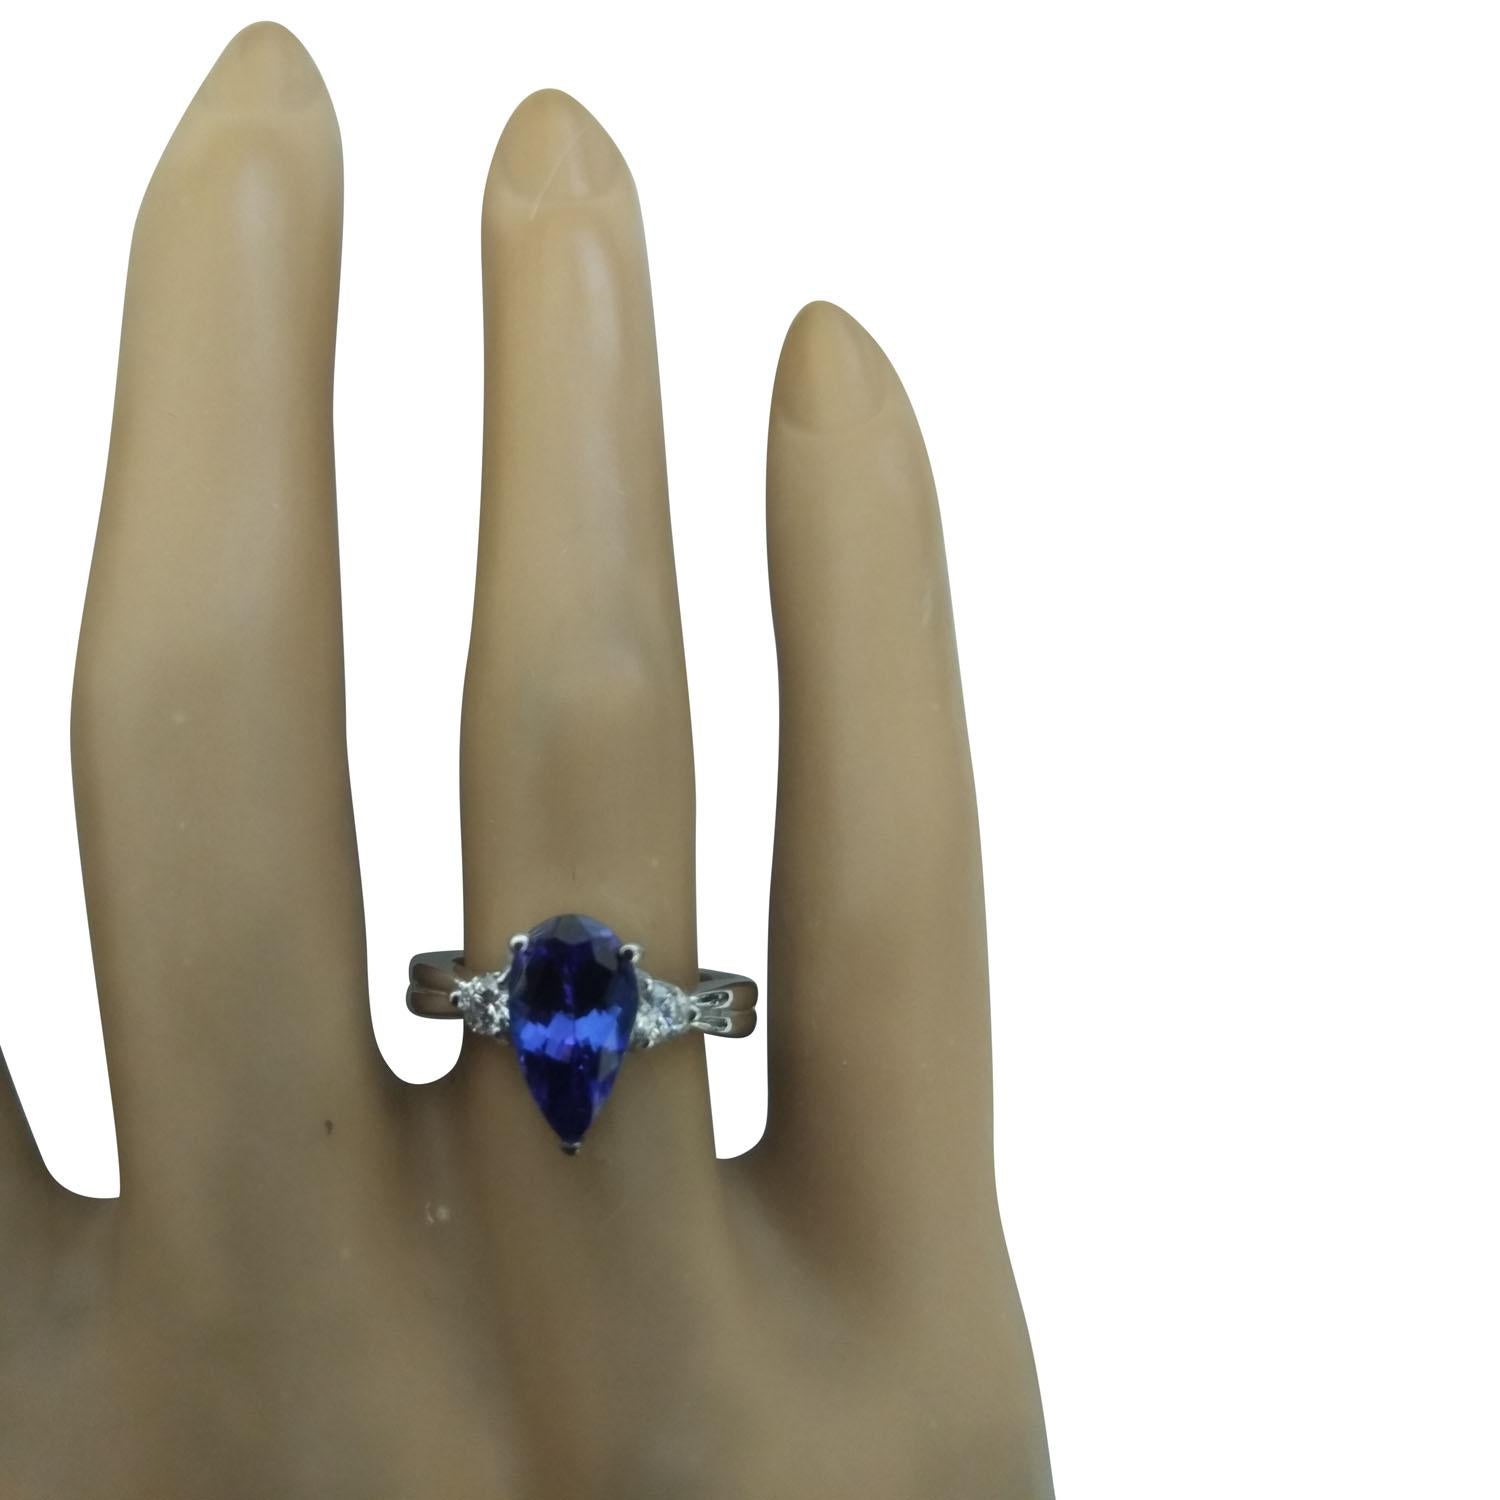 2.17 Carat Natural Tanzanite 14 Karat Solid White Gold Diamond Ring
Stamped: 14K 
Total Ring Weight: 3.1 Grams 
Tanzanite Weight 2.00 Carat (10.00x6.00 Millimeters)
Diamond Weight: 0.17 carat (F-G Color, VS2-SI1 Clarity )
Face Measures: 10.70x12.10